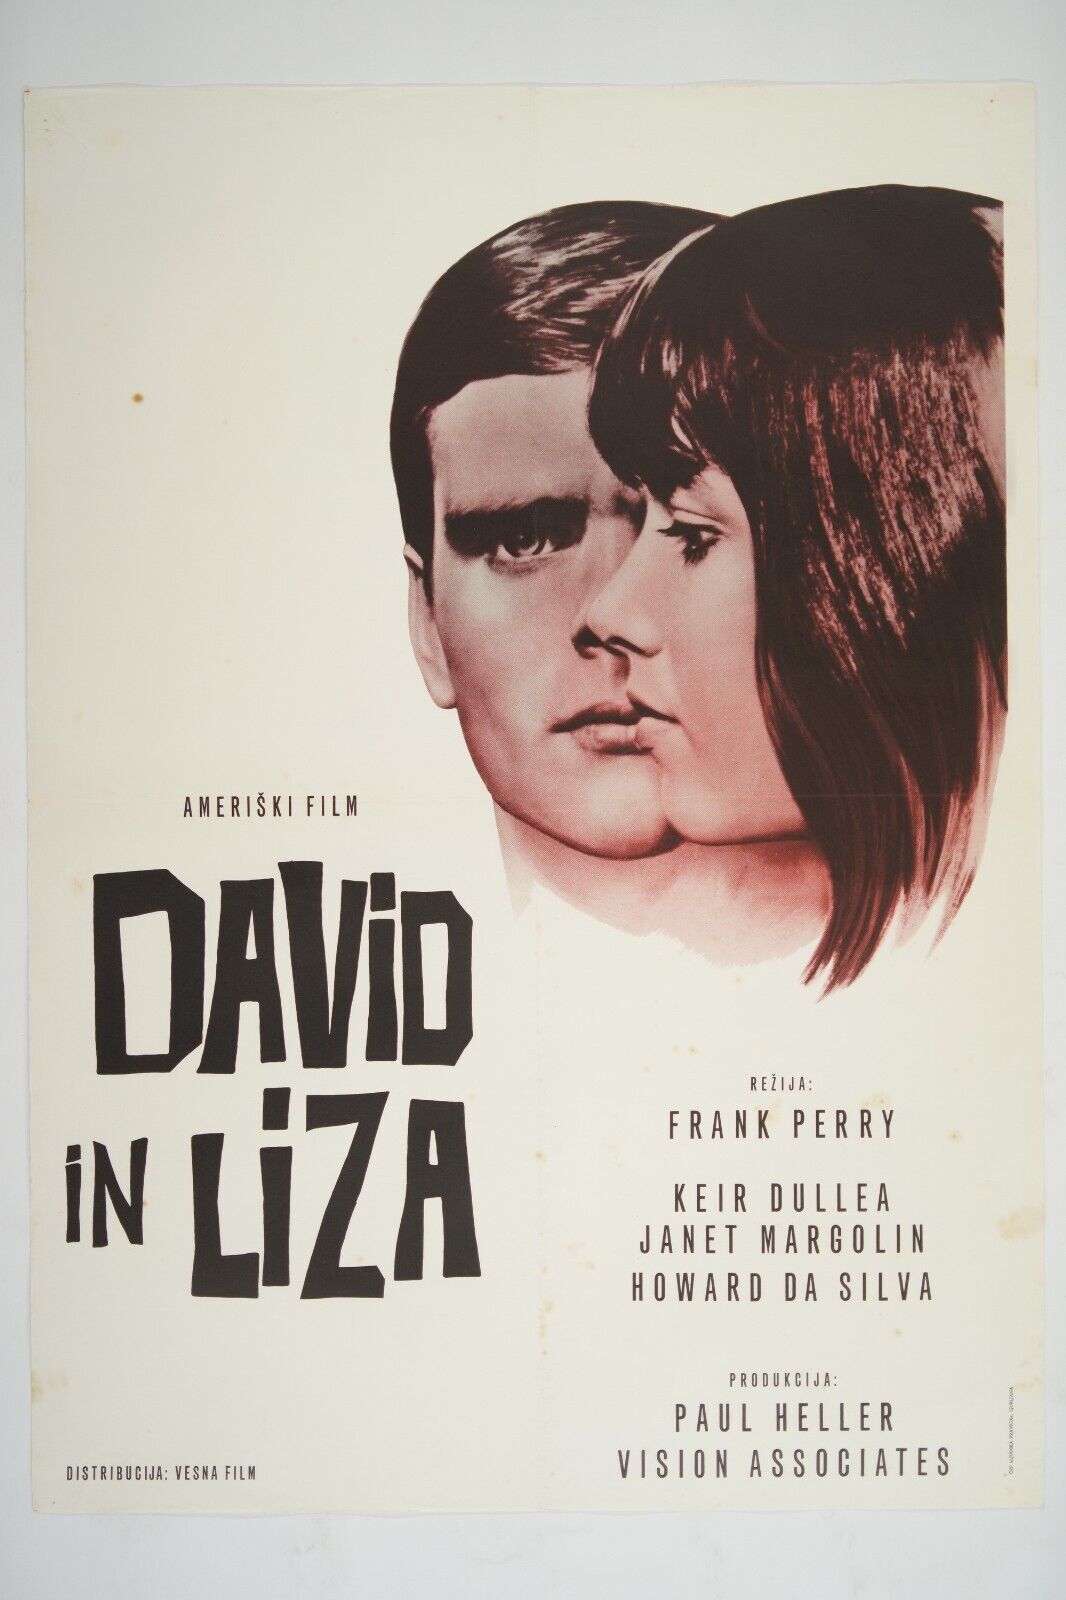 DAVID AND LISA exYU movie poster 1962 KEIR DULLEA & JANET MARGOLIN FRANK PERRY